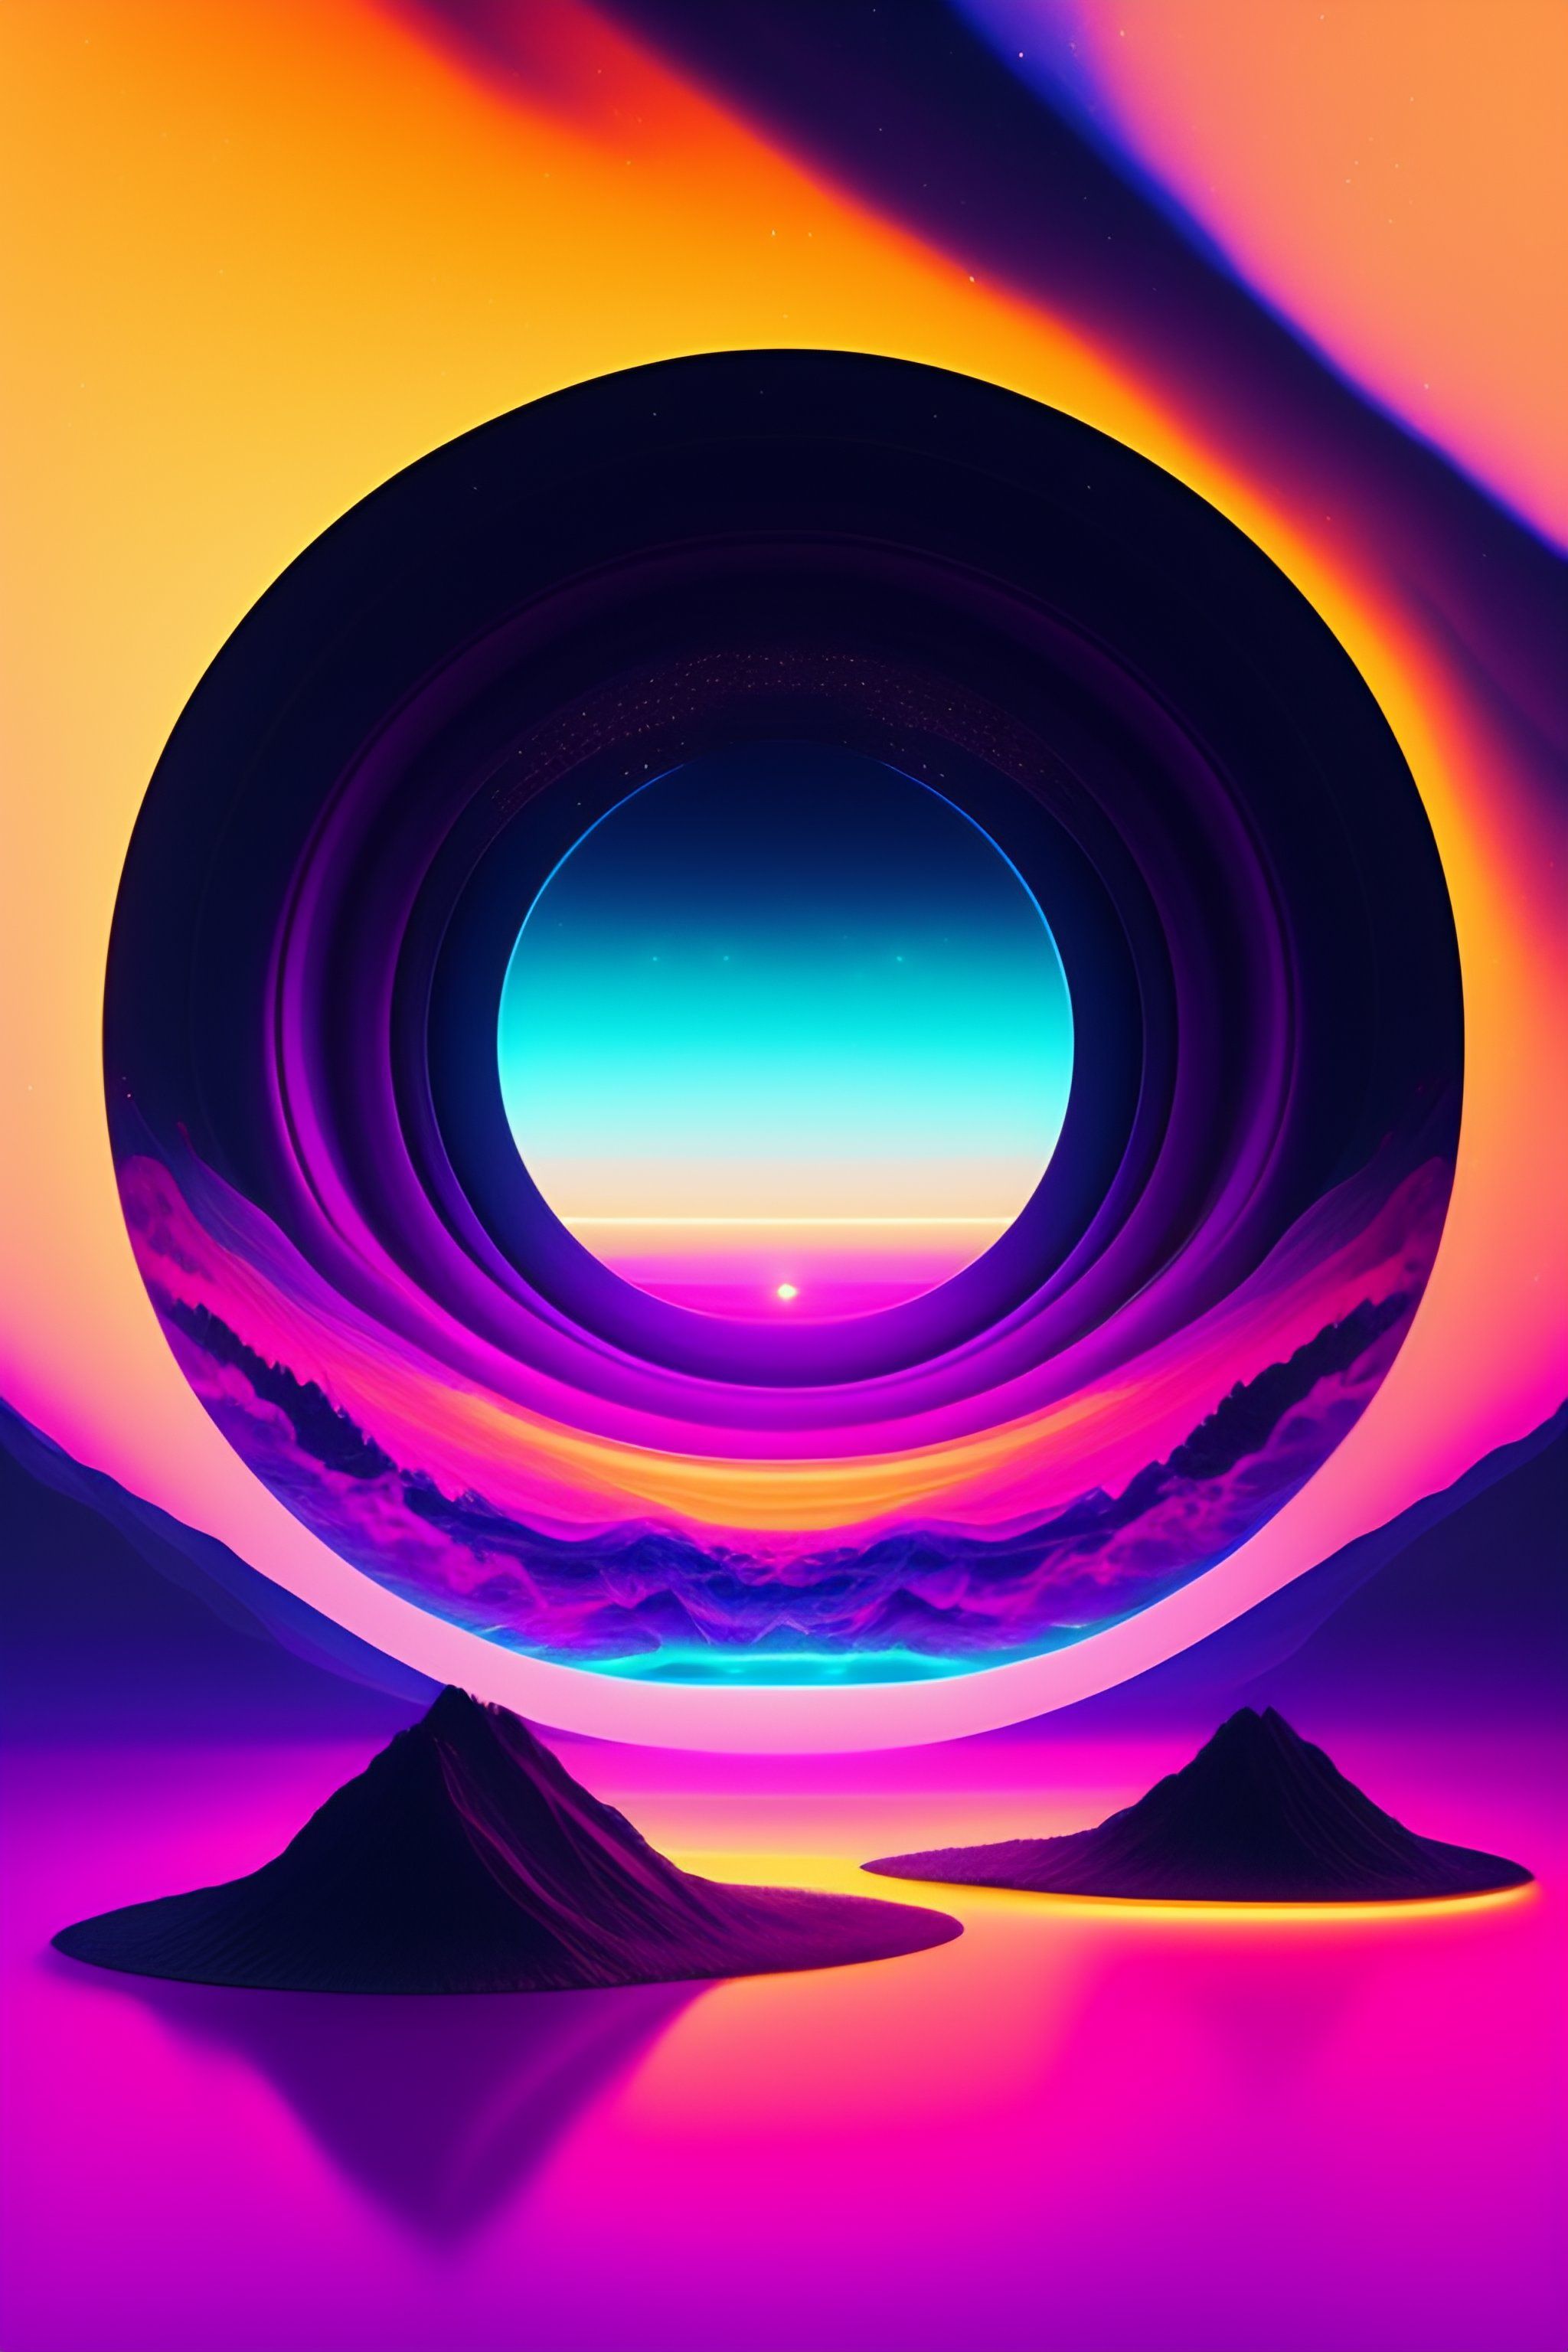 A futuristic circle portal, with a purple and blue gradient, and mountains in the background. - Dark vaporwave